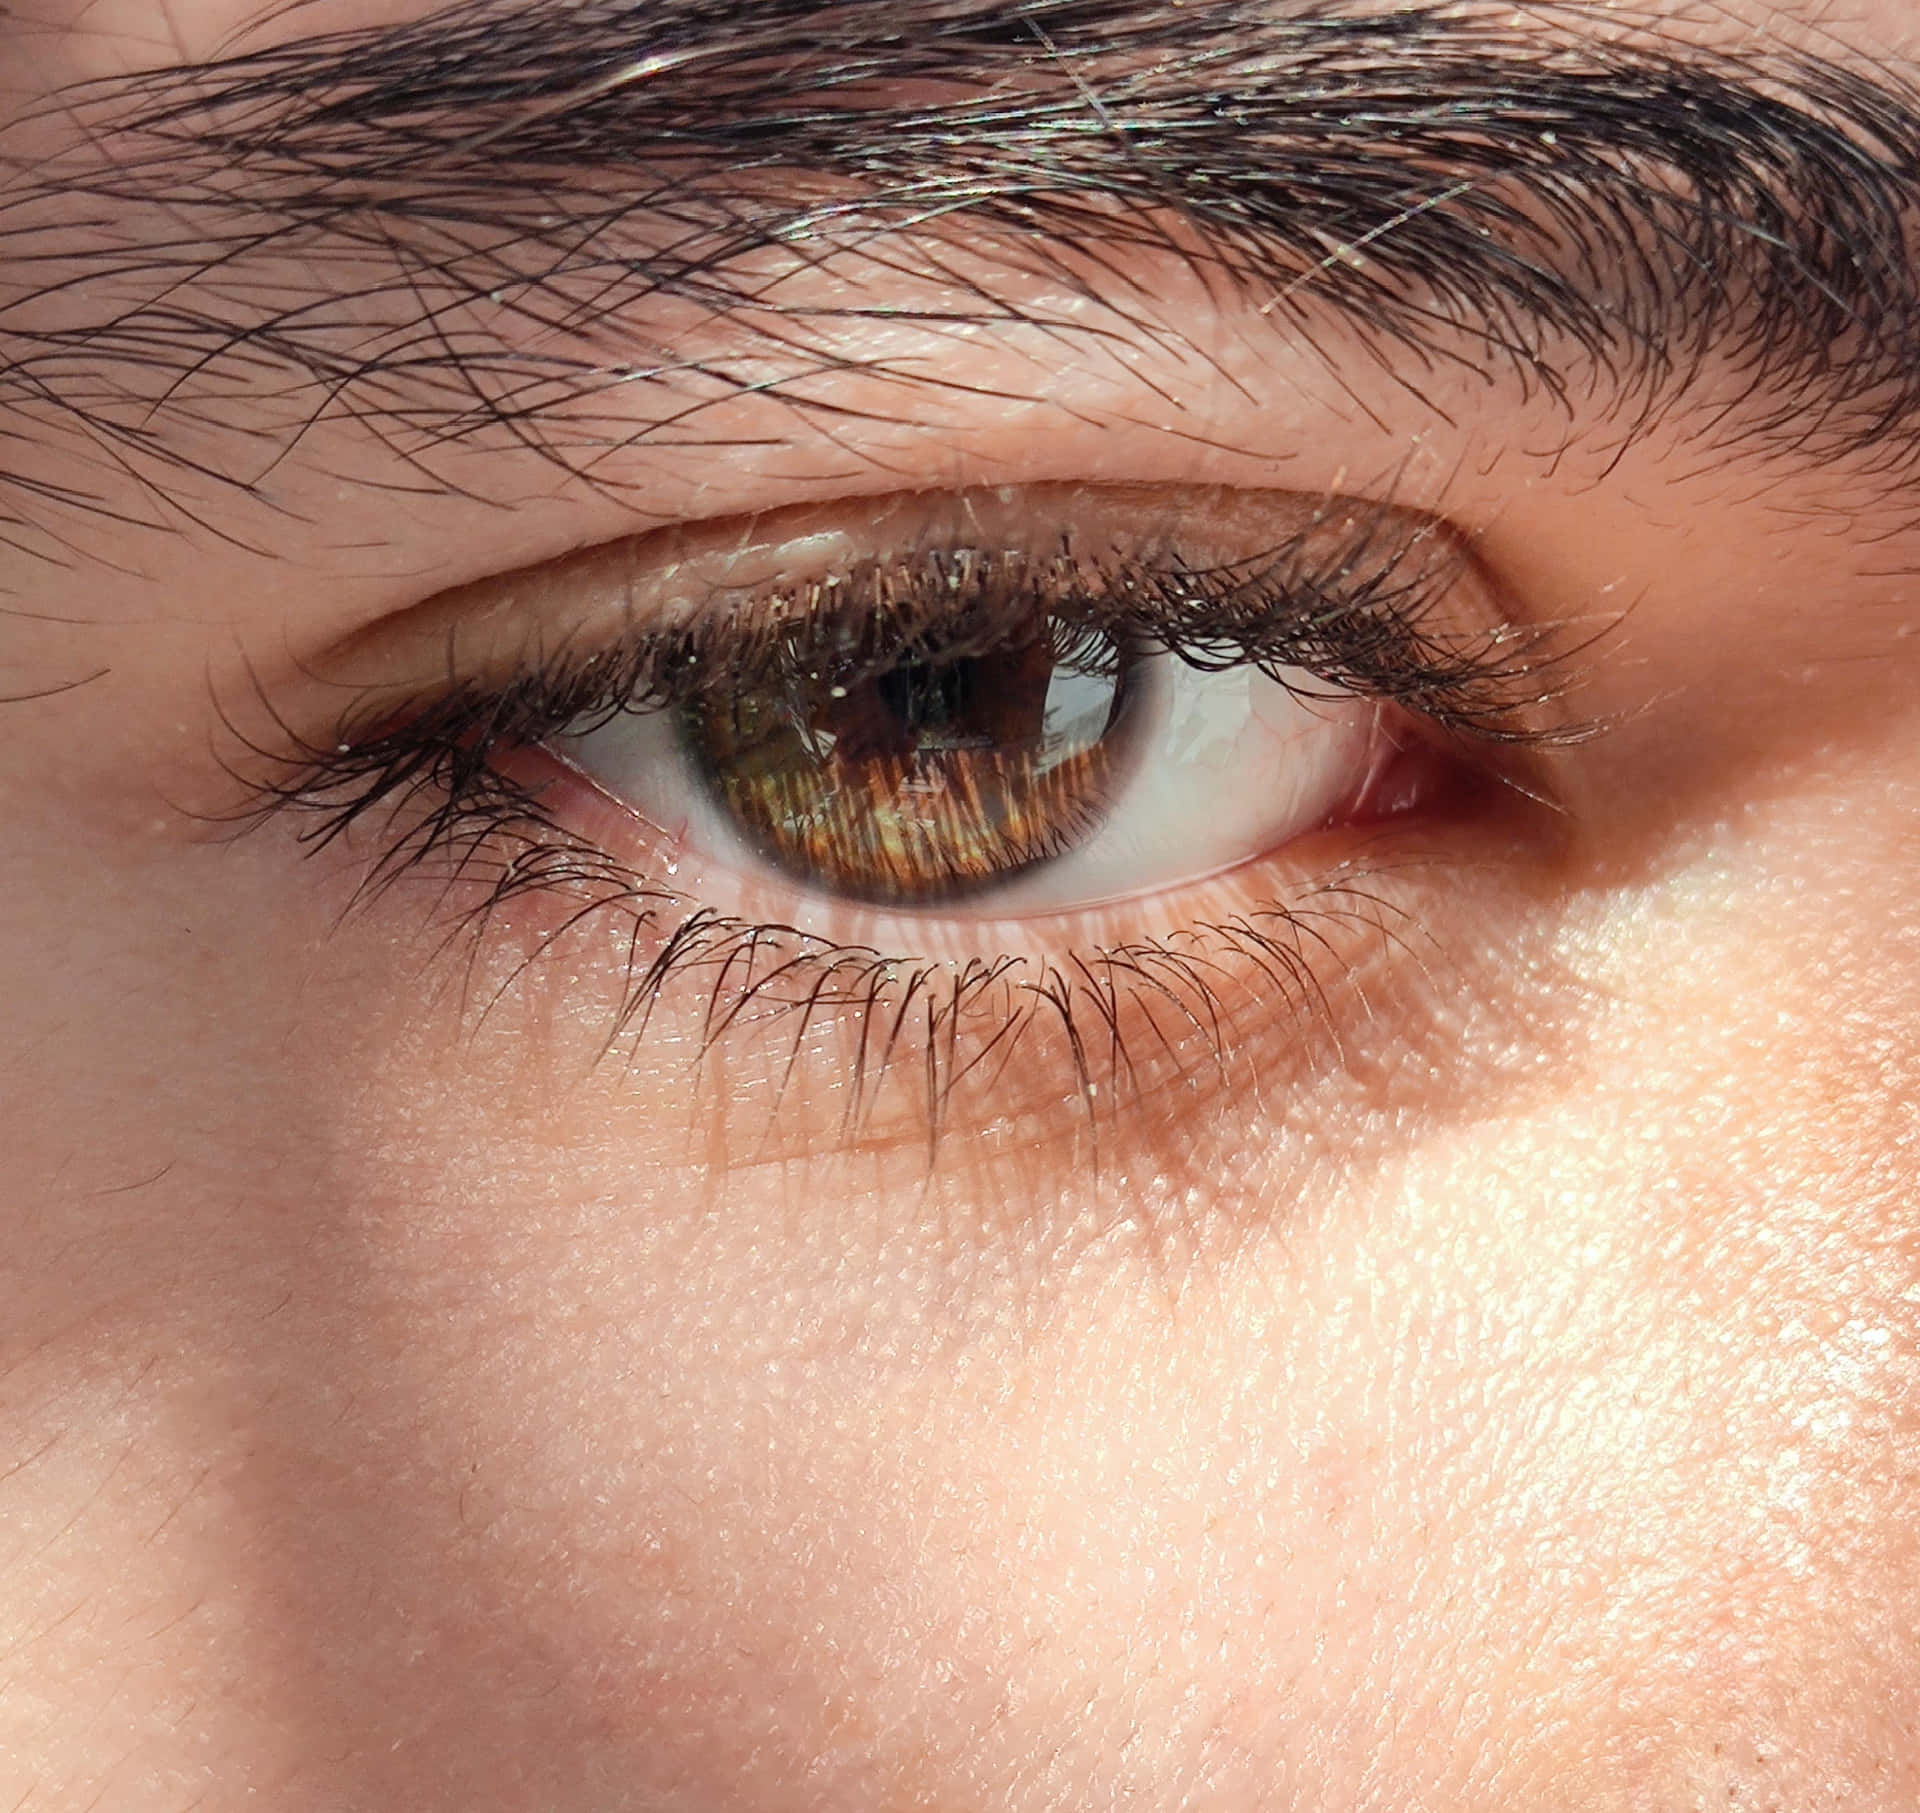 A Close Up Of A Man's Eye With Brown Eyes